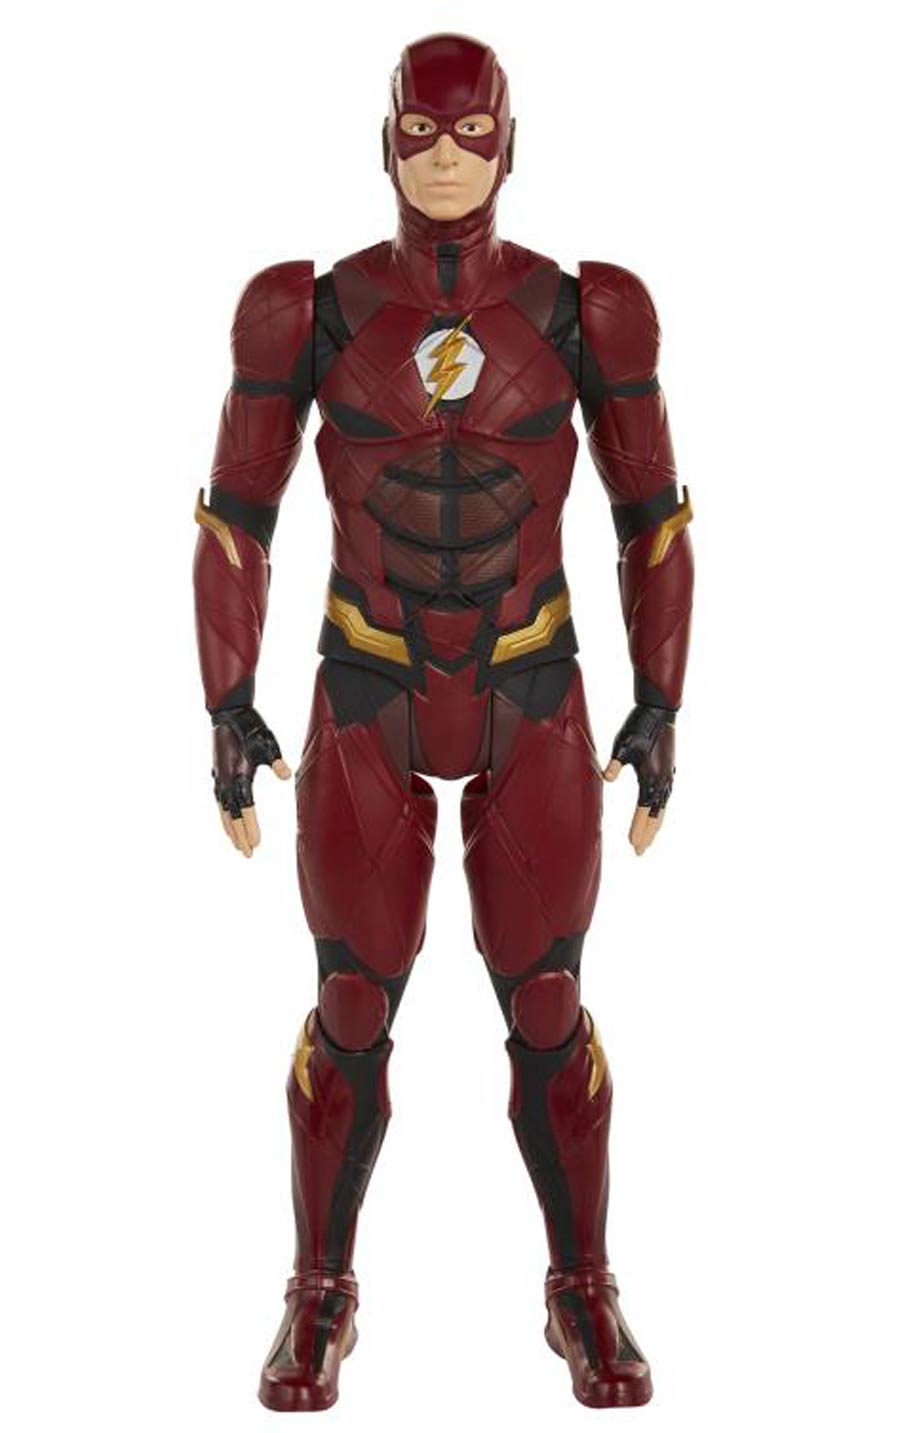 Justice League Movie Big Figs 20-Inch Action Figure Wave 2 - Flash